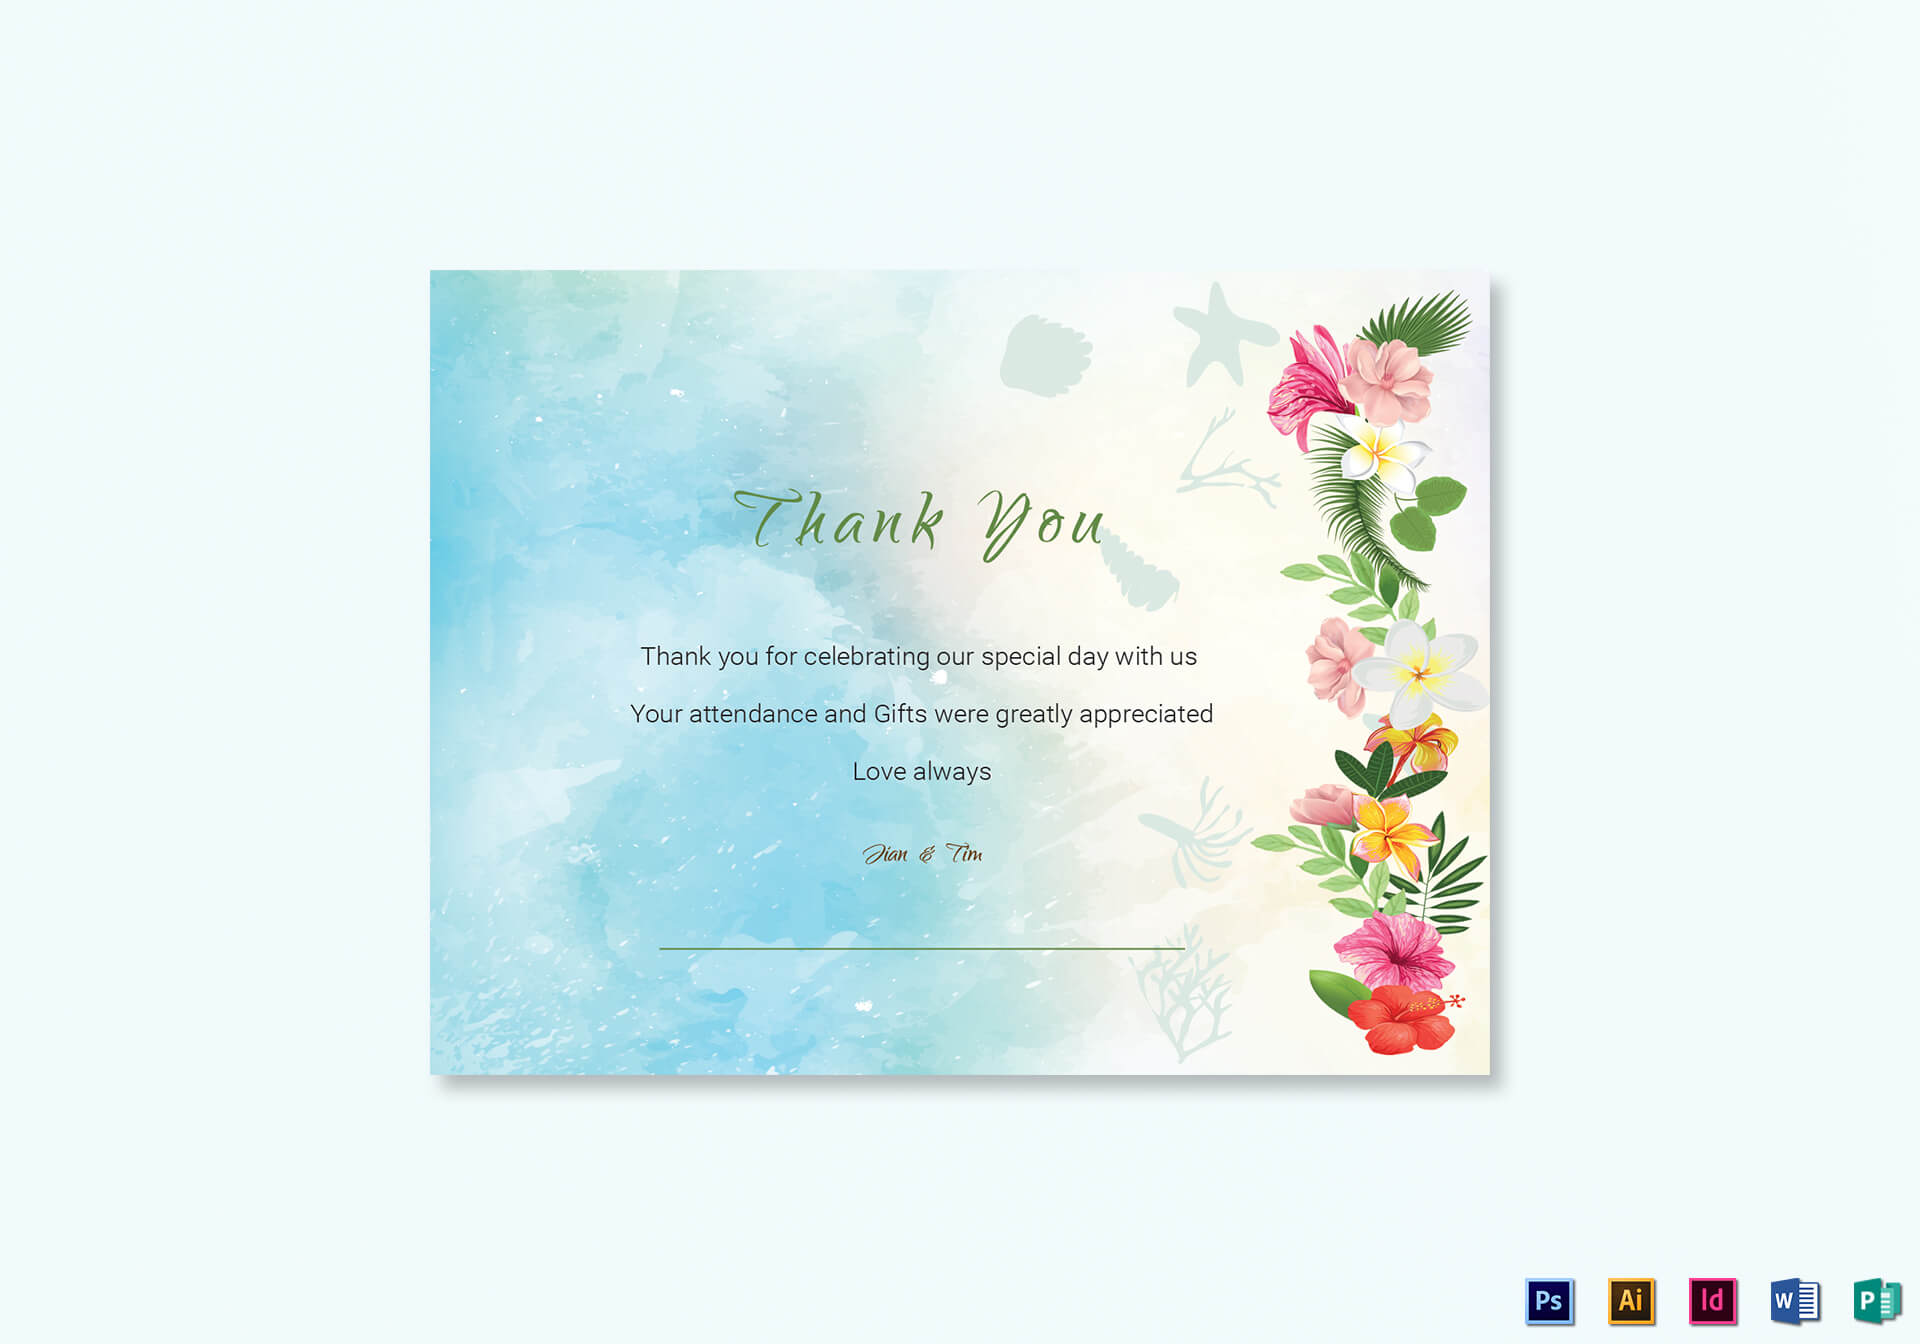 010 Thank You Card Template Word Top Ideas Business Free For Thank You Card Template Word